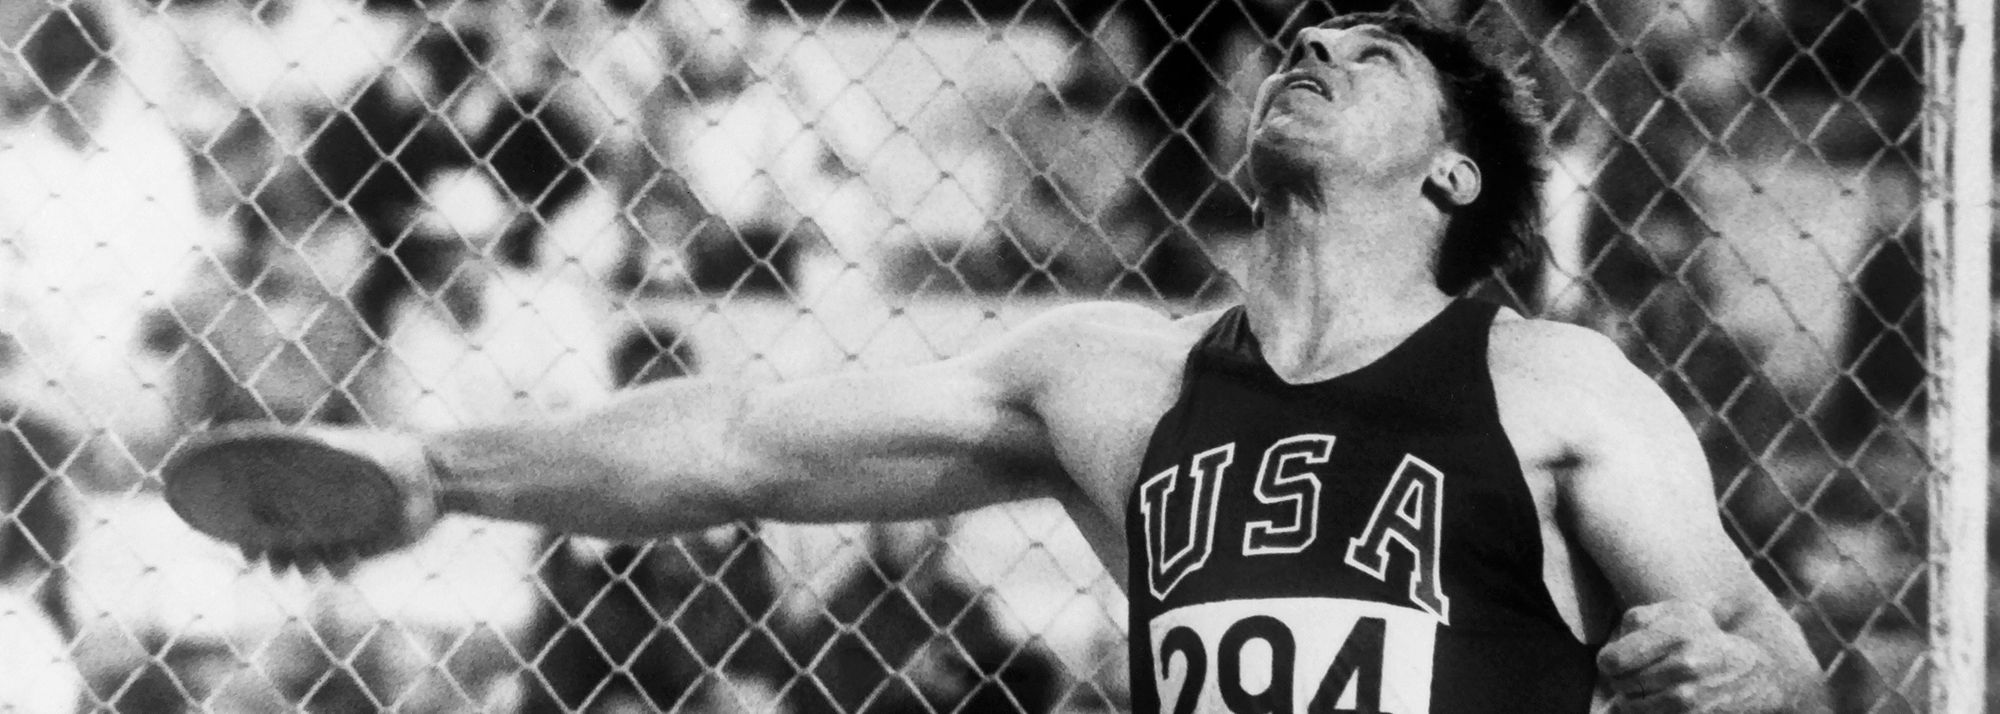 Al Oerter was already halfway towards becoming an Olympic legend when he set a world record of 61.10m on 18 May 1962